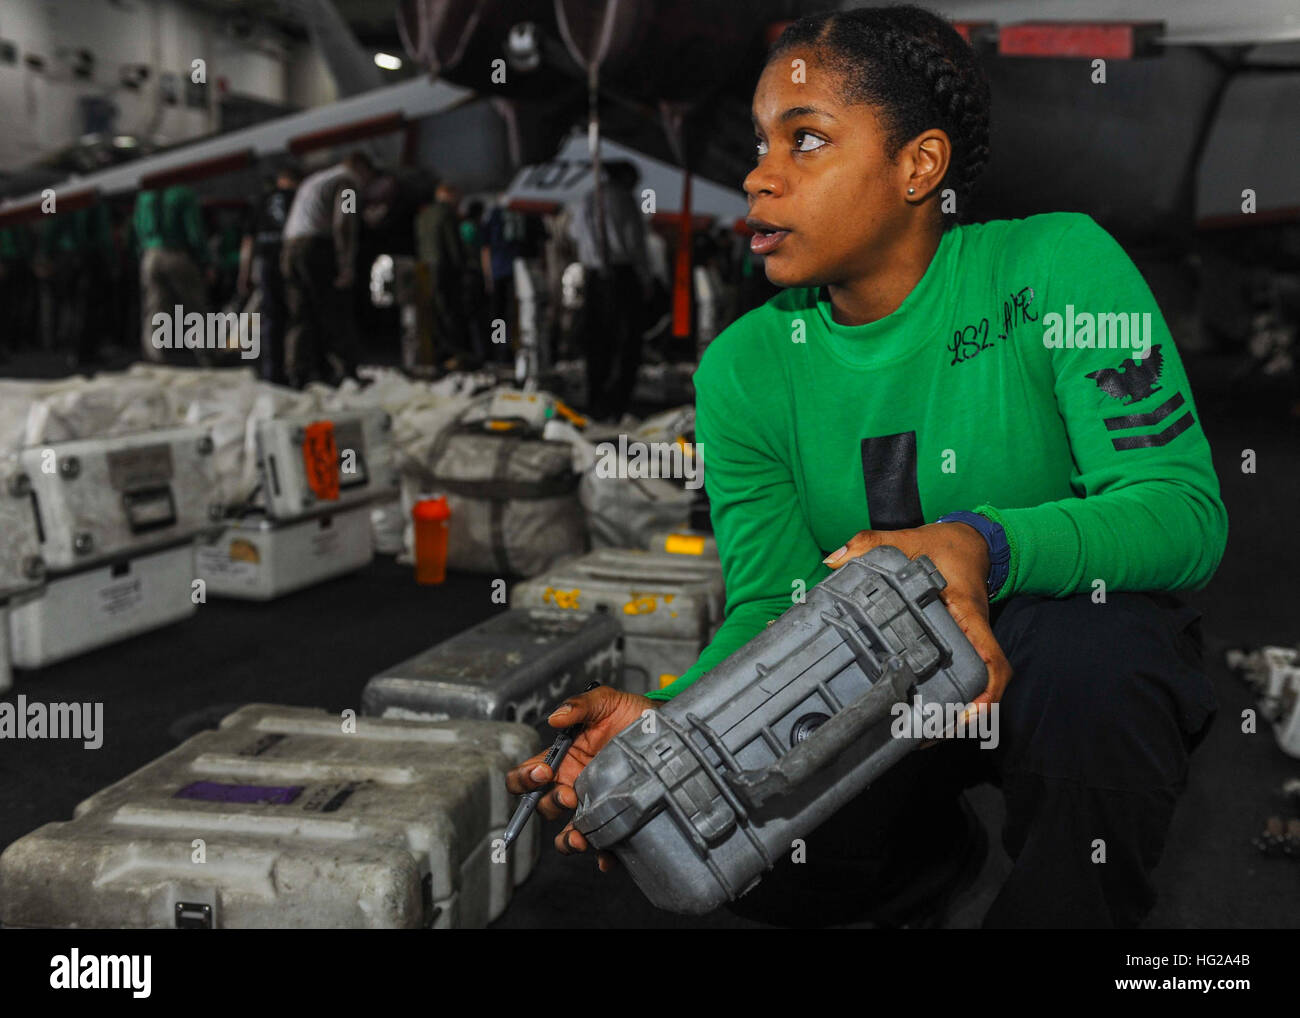 151010-N-CQ428-044  U.S. 5TH FLEET AREA OF OPERATIONS (Oct. 11, 2015) – Logistics Specialist 2nd Class Sheena Lair, from Ocho Rios, Jamaica, organizes an individual materials readiness list for inspection in the hangar bay aboard the aircraft carrier USS Theodore Roosevelt (CVN 71). Theodore Roosevelt is deployed in the U.S. 5th Fleet area of operations supporting Operation Inherent Resolve, strike operations in Iraq and Syria as directed, maritime security operations and theater security cooperation efforts in the region. (U.S. Navy photo by Mass Communication Specialist 3rd Class Jennifer Ca Stock Photo